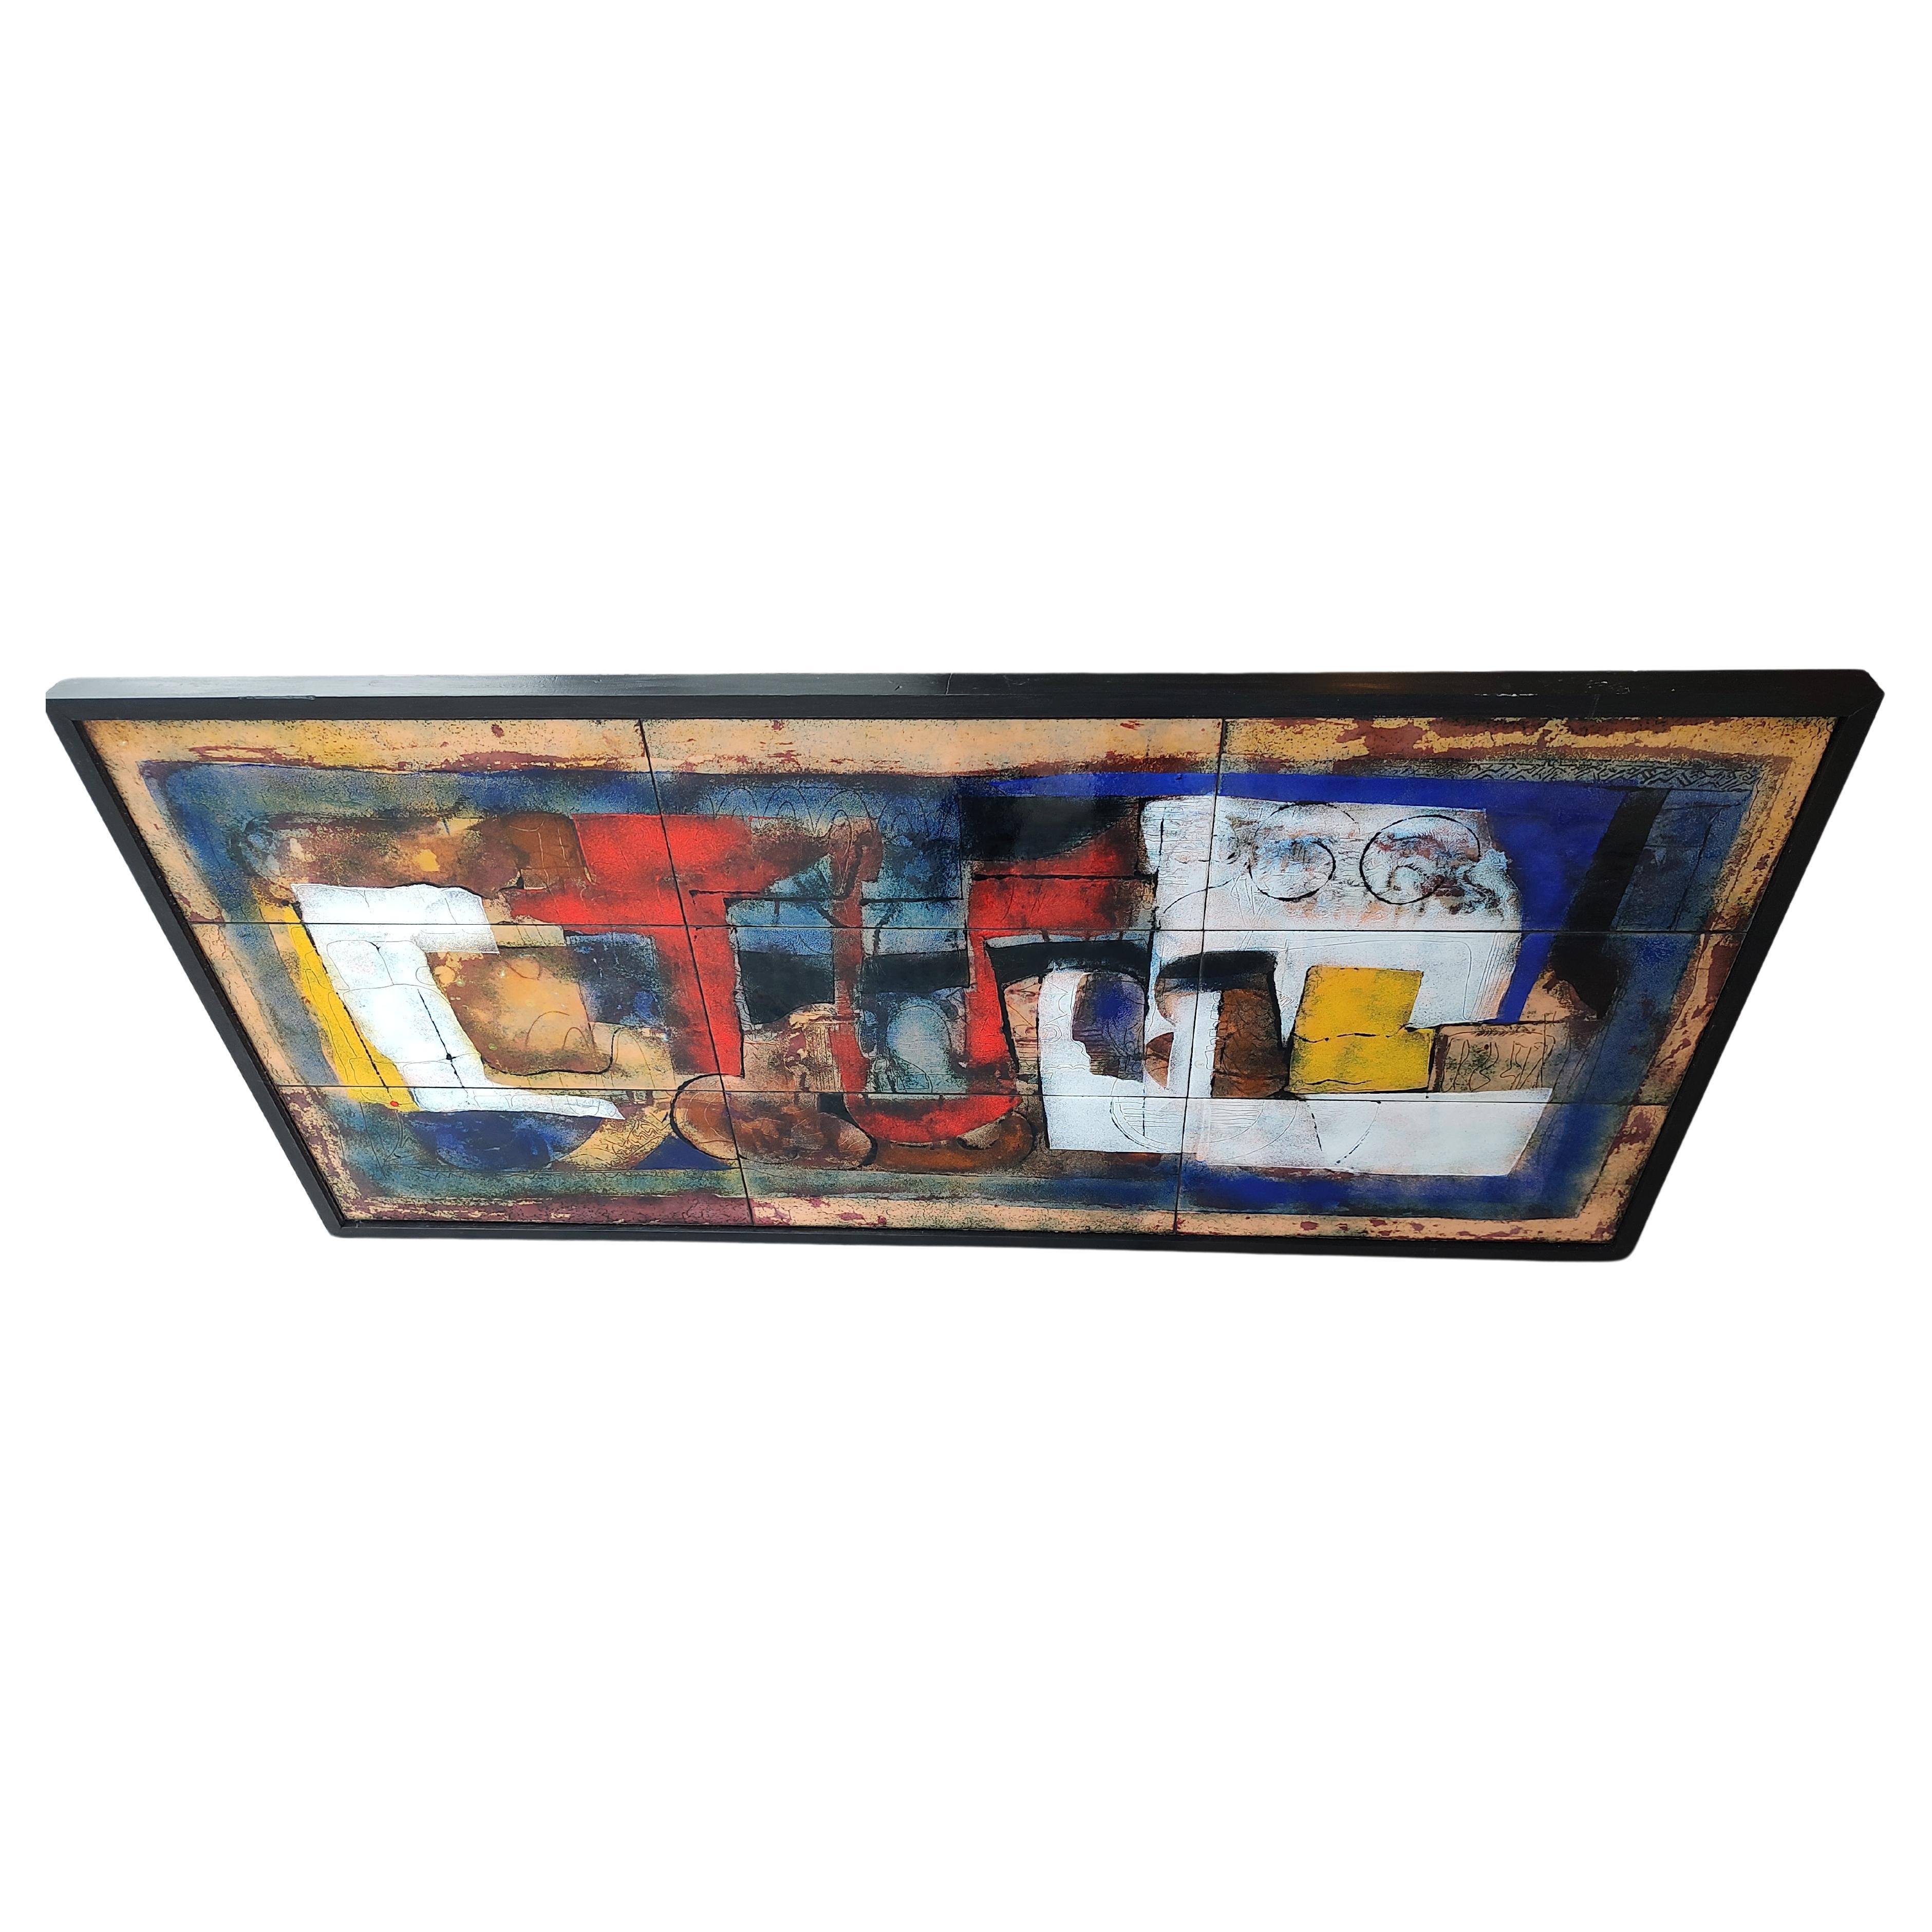 Tremendous Enamel o in Copper Abstract work by Giorgio Mussoni Italy c1960. Primary colors in blocks with abstract placements on nine rectangular pieces, tiles. Framed in black and ready to be hung
Has some weight to it
In excellent vintage